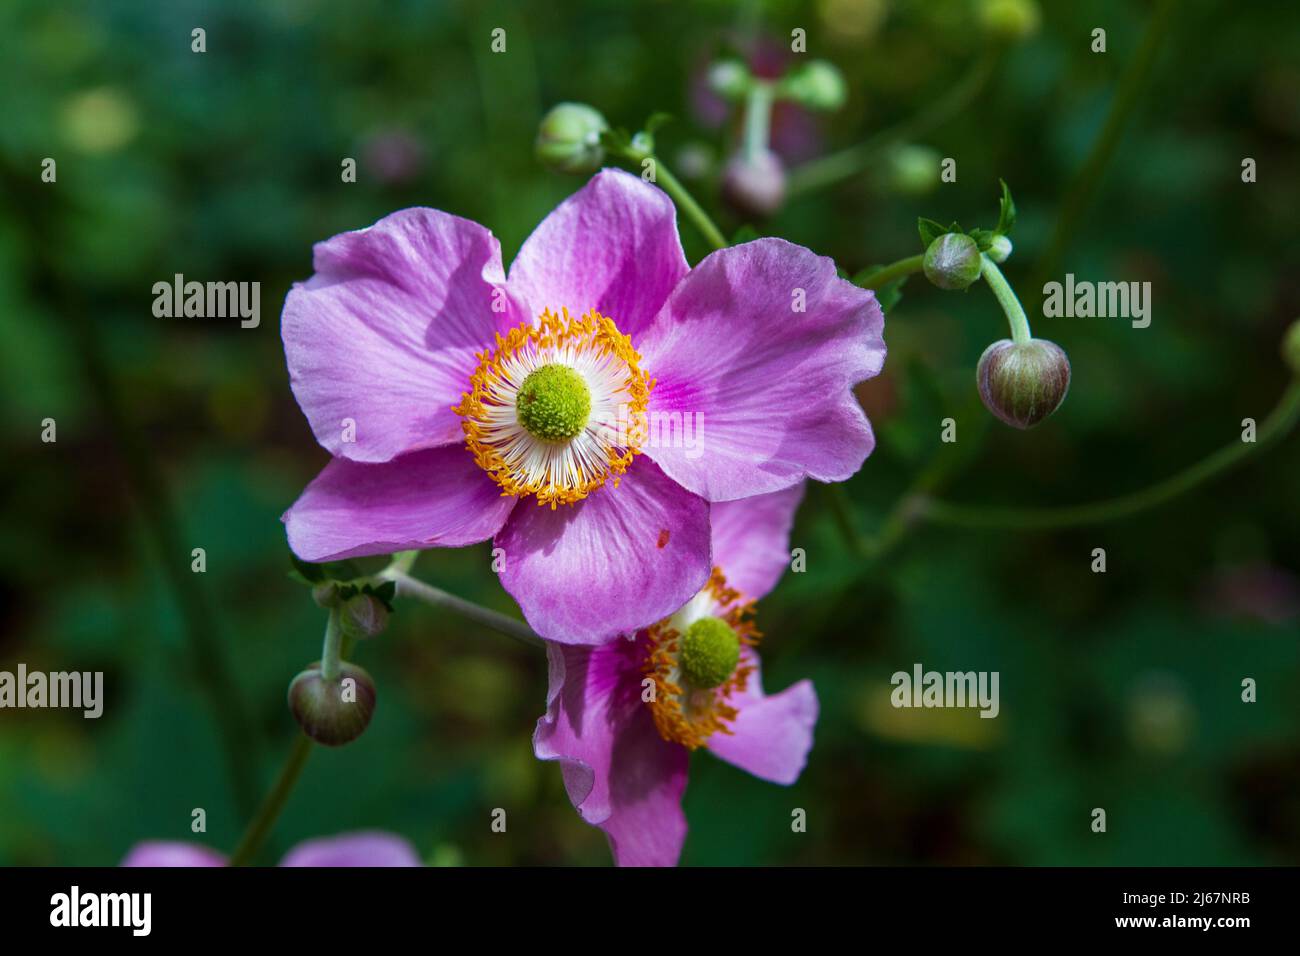 Bright pink September Charm Japanese Anemones (Anemone hupehensis) blooming in a late summer woodland garden. Stock Photo